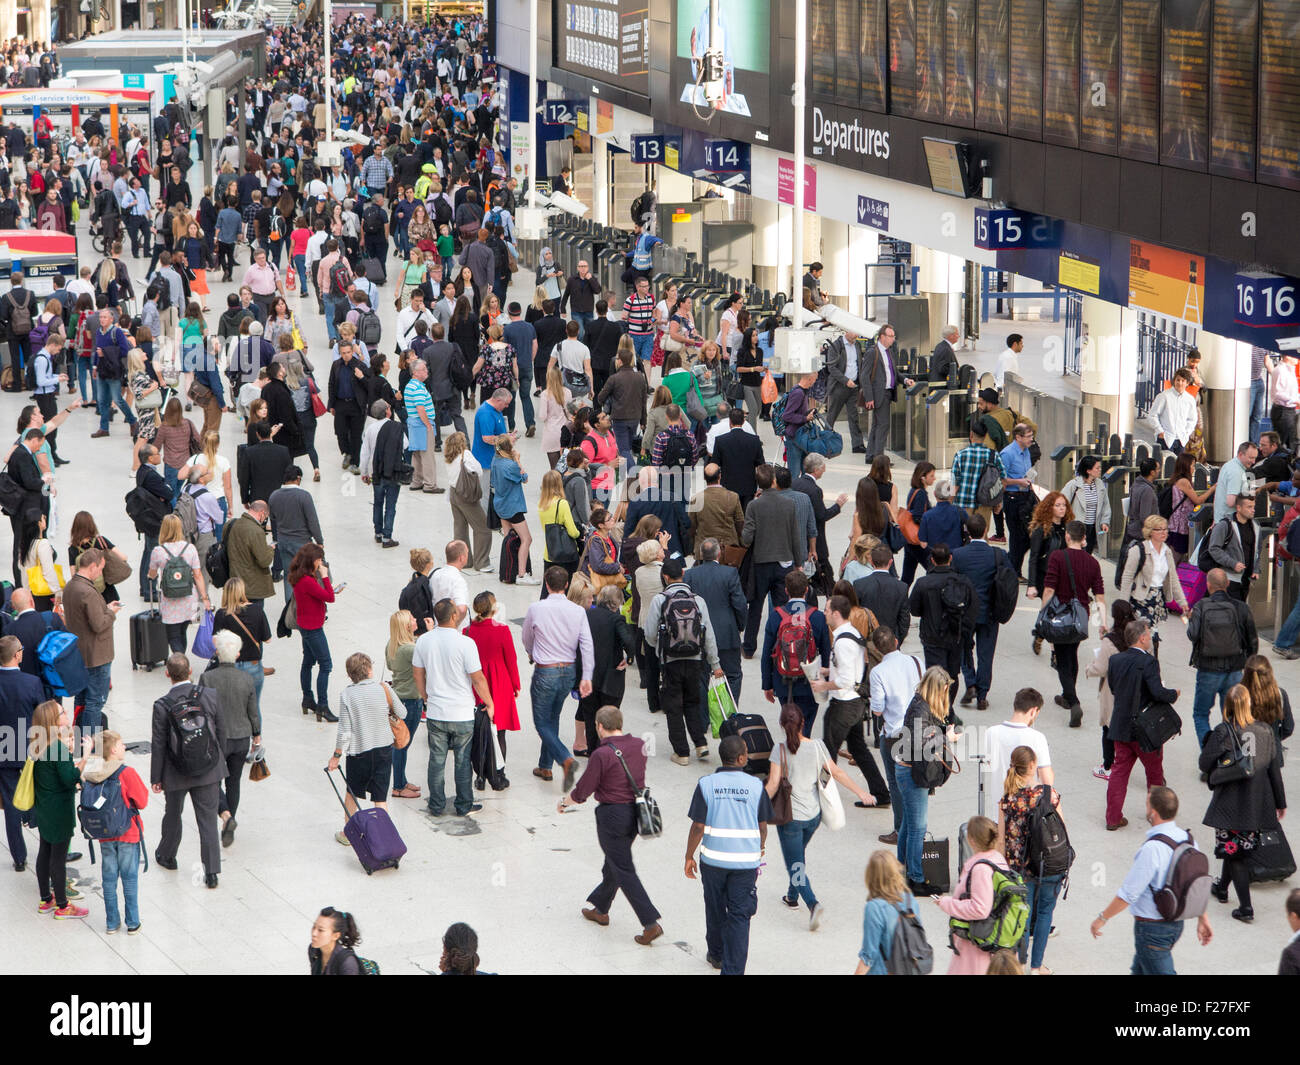 Crowds of people rushing to get home from work after a long day at work Stock Photo